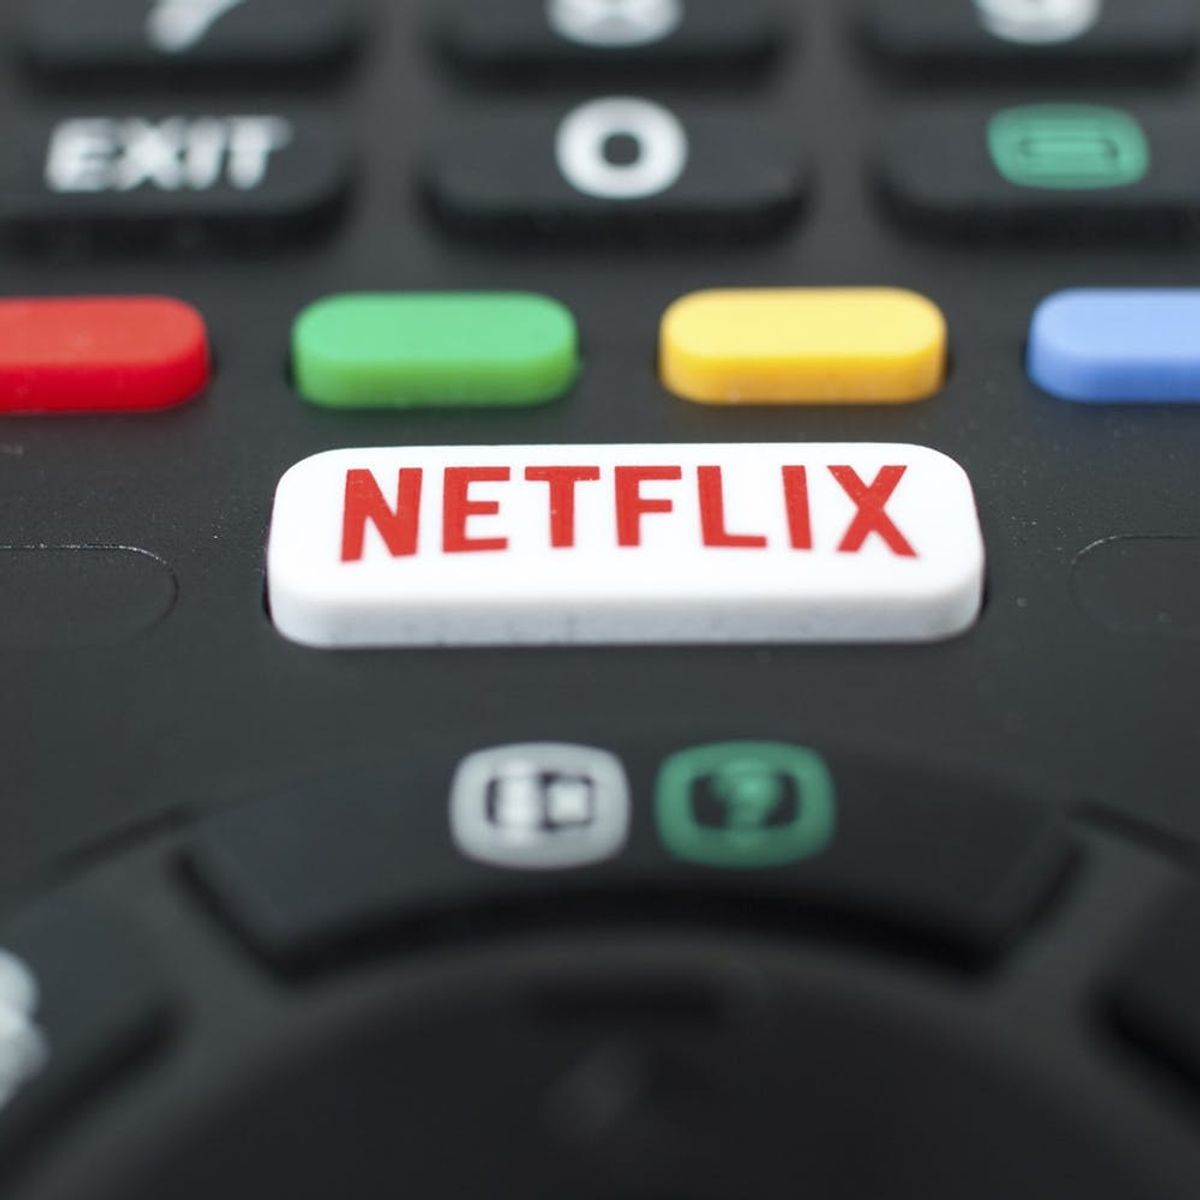 Why This Netflix Lawsuit Means You Could Be in for Some Free Binge Watching